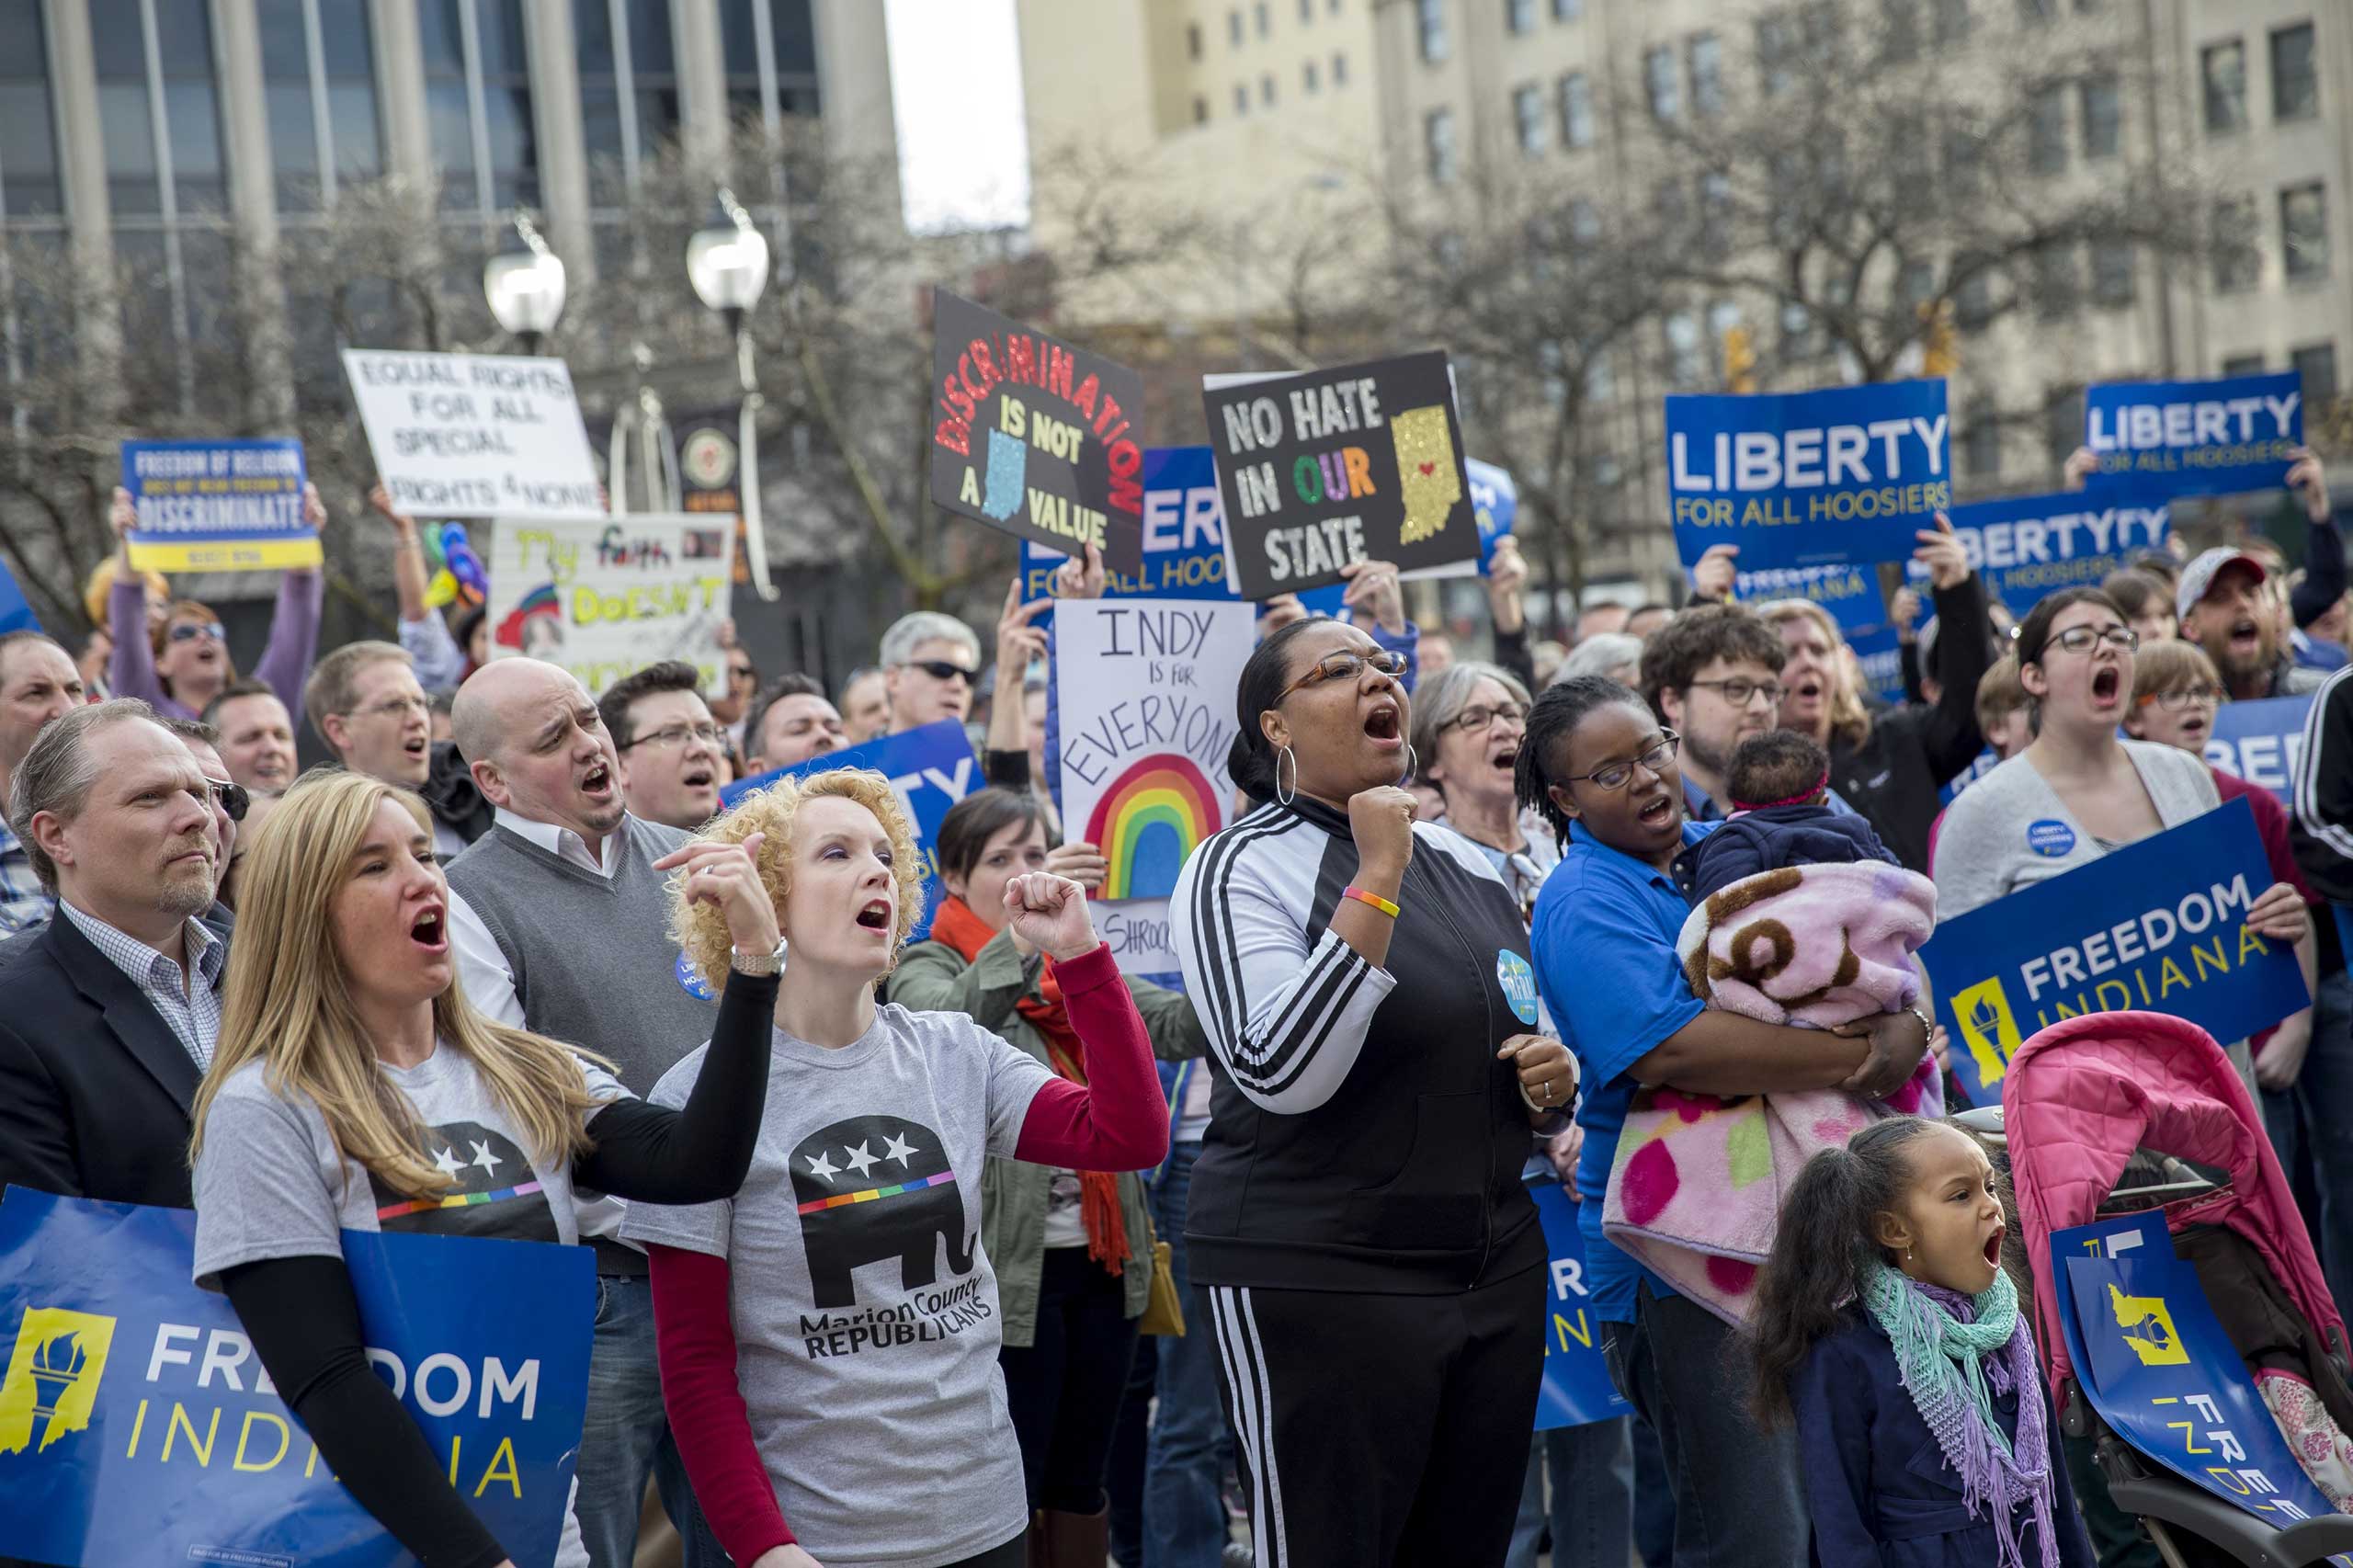 Demonstrators  gather outside the City County Building in Indianapolis, Indiana on March 30, 2015. (Aaron P. Bernstein—Getty Images)